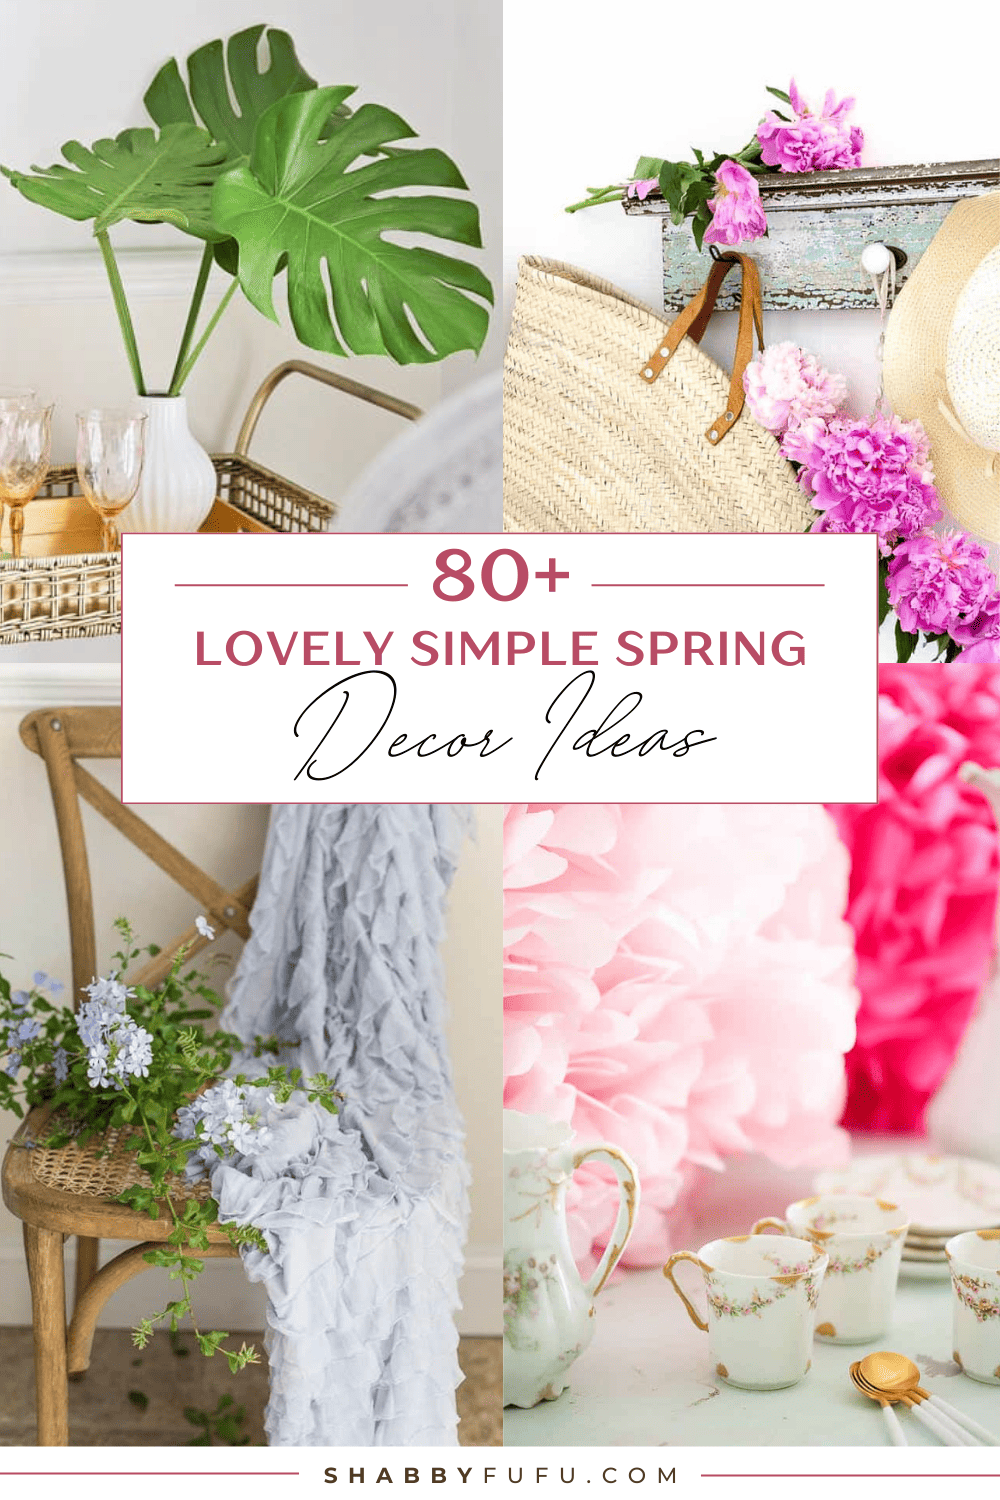 Pinterest decorative image featuring a collage of home decor ideas for spring titled "80+ Lovely Simple Spring Decor Ideas"